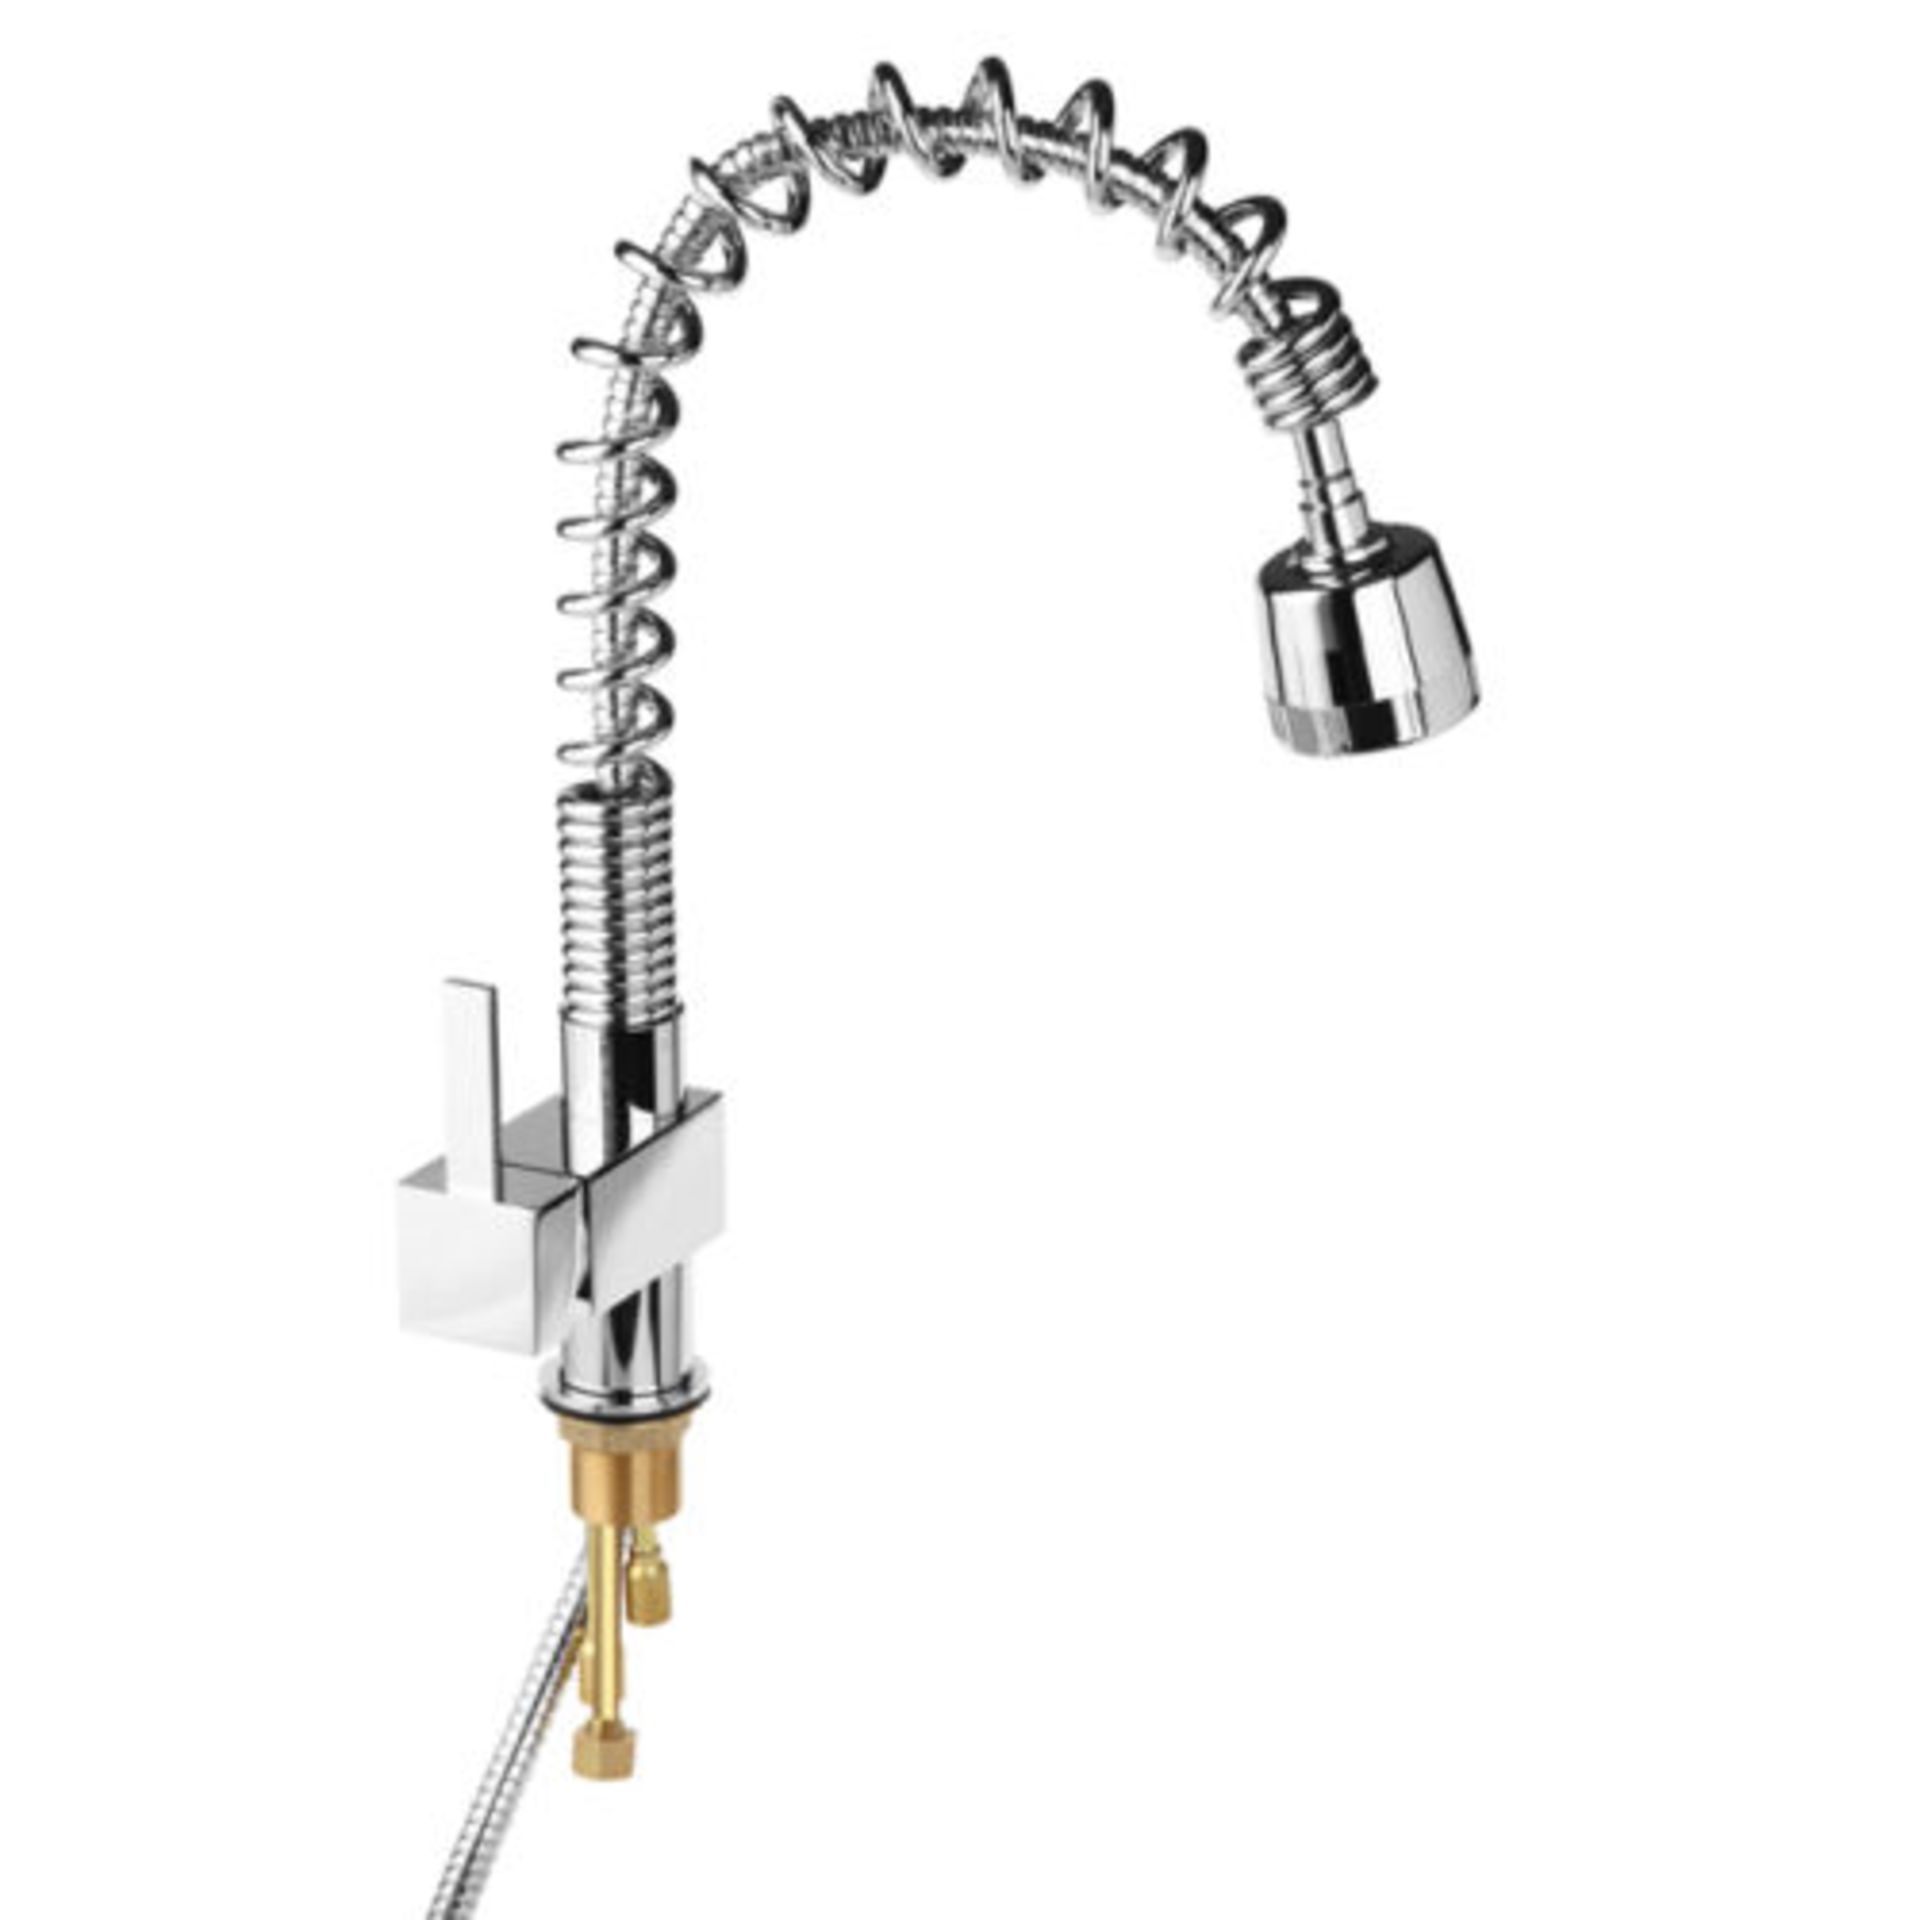 (V223) Maddie Brushed Chrome Monobloc Kitchen Tap Swivel Pull Out Spray Mixer. RRP £219.99. - Image 2 of 2